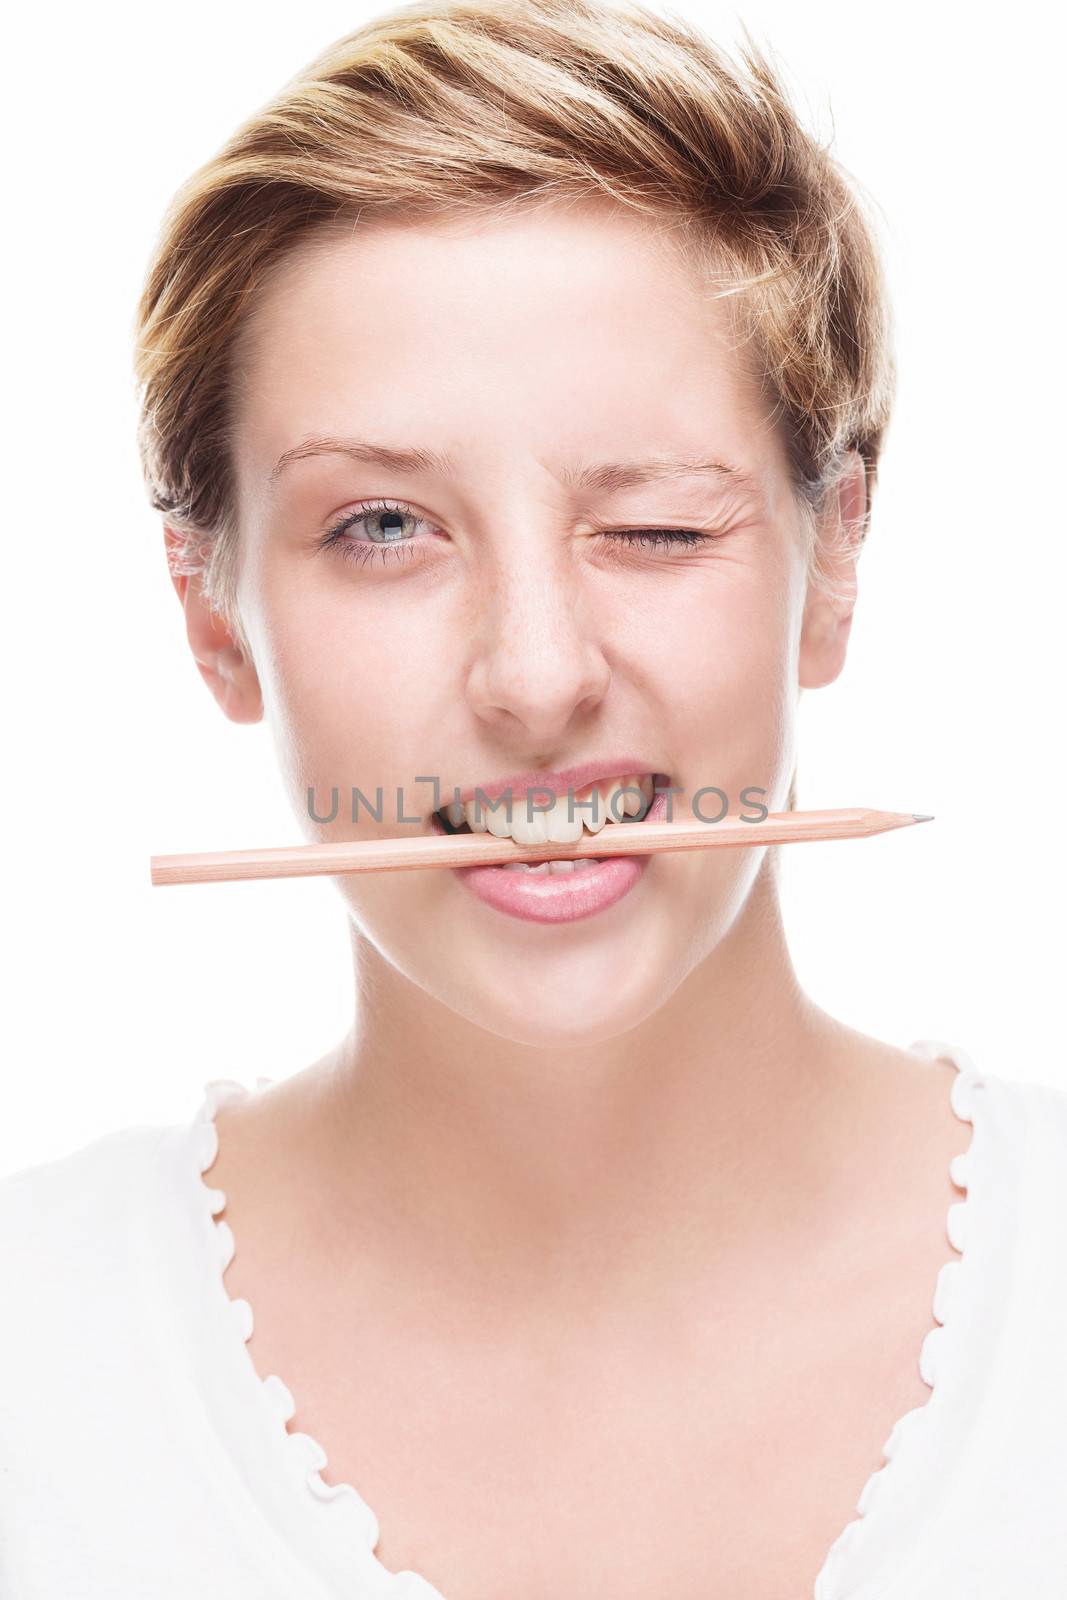 woman winking with pencil in her mouth by RobStark